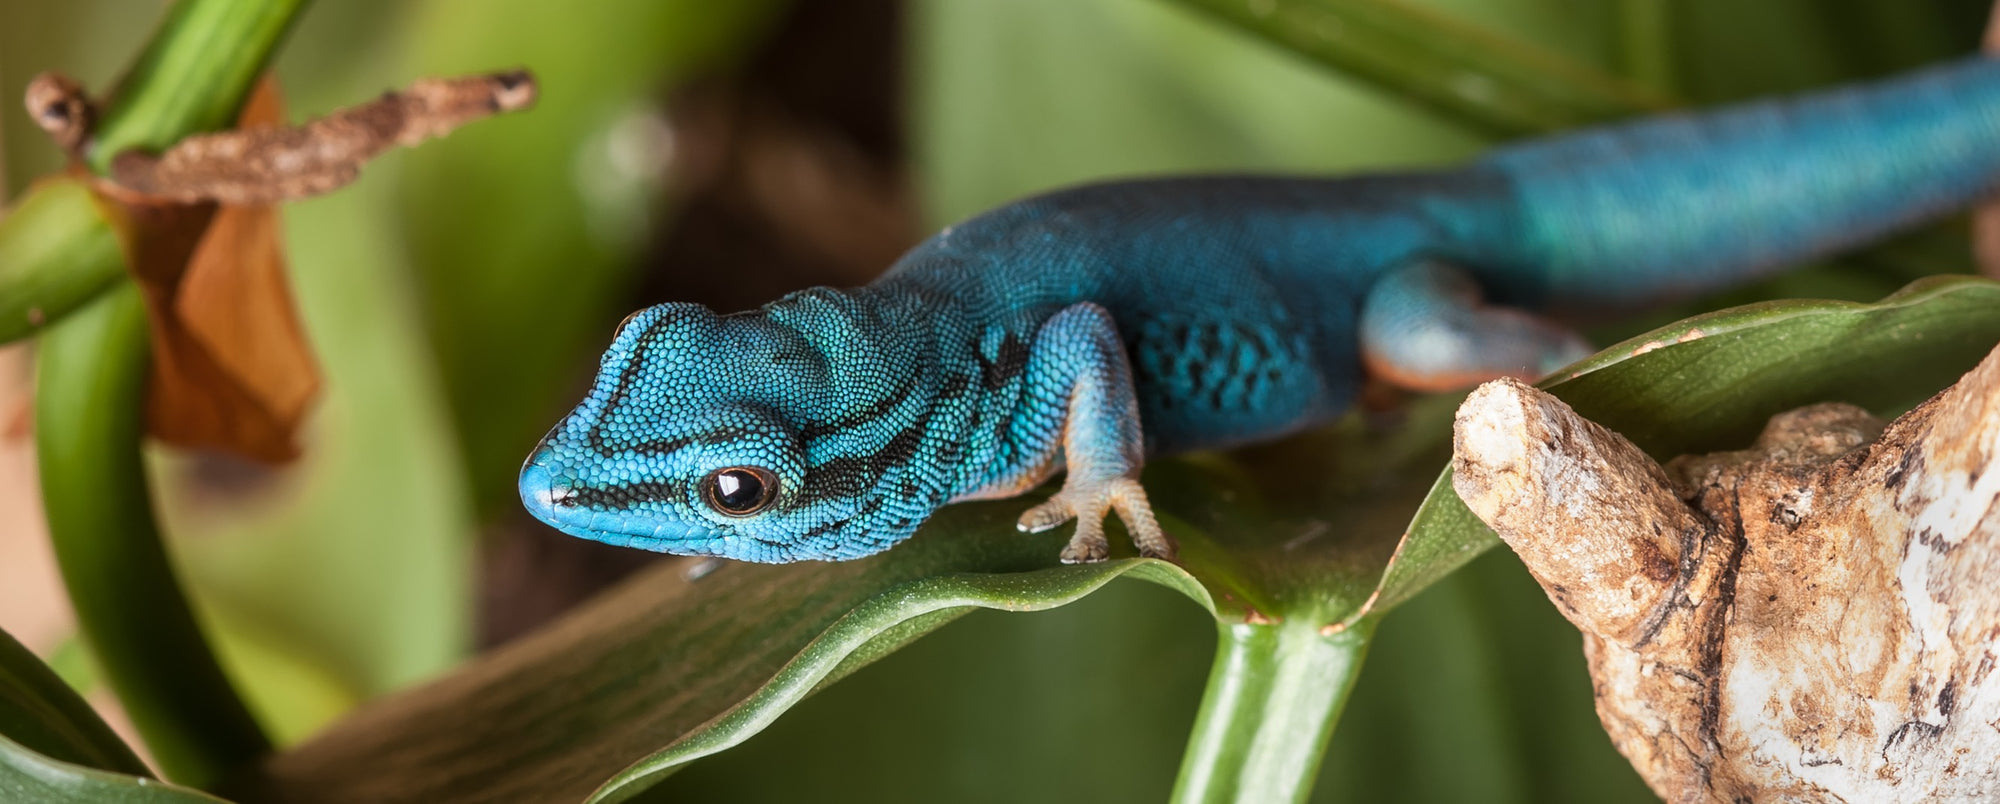 Endangered Creature Feature: Turquoise Dwarf Gecko